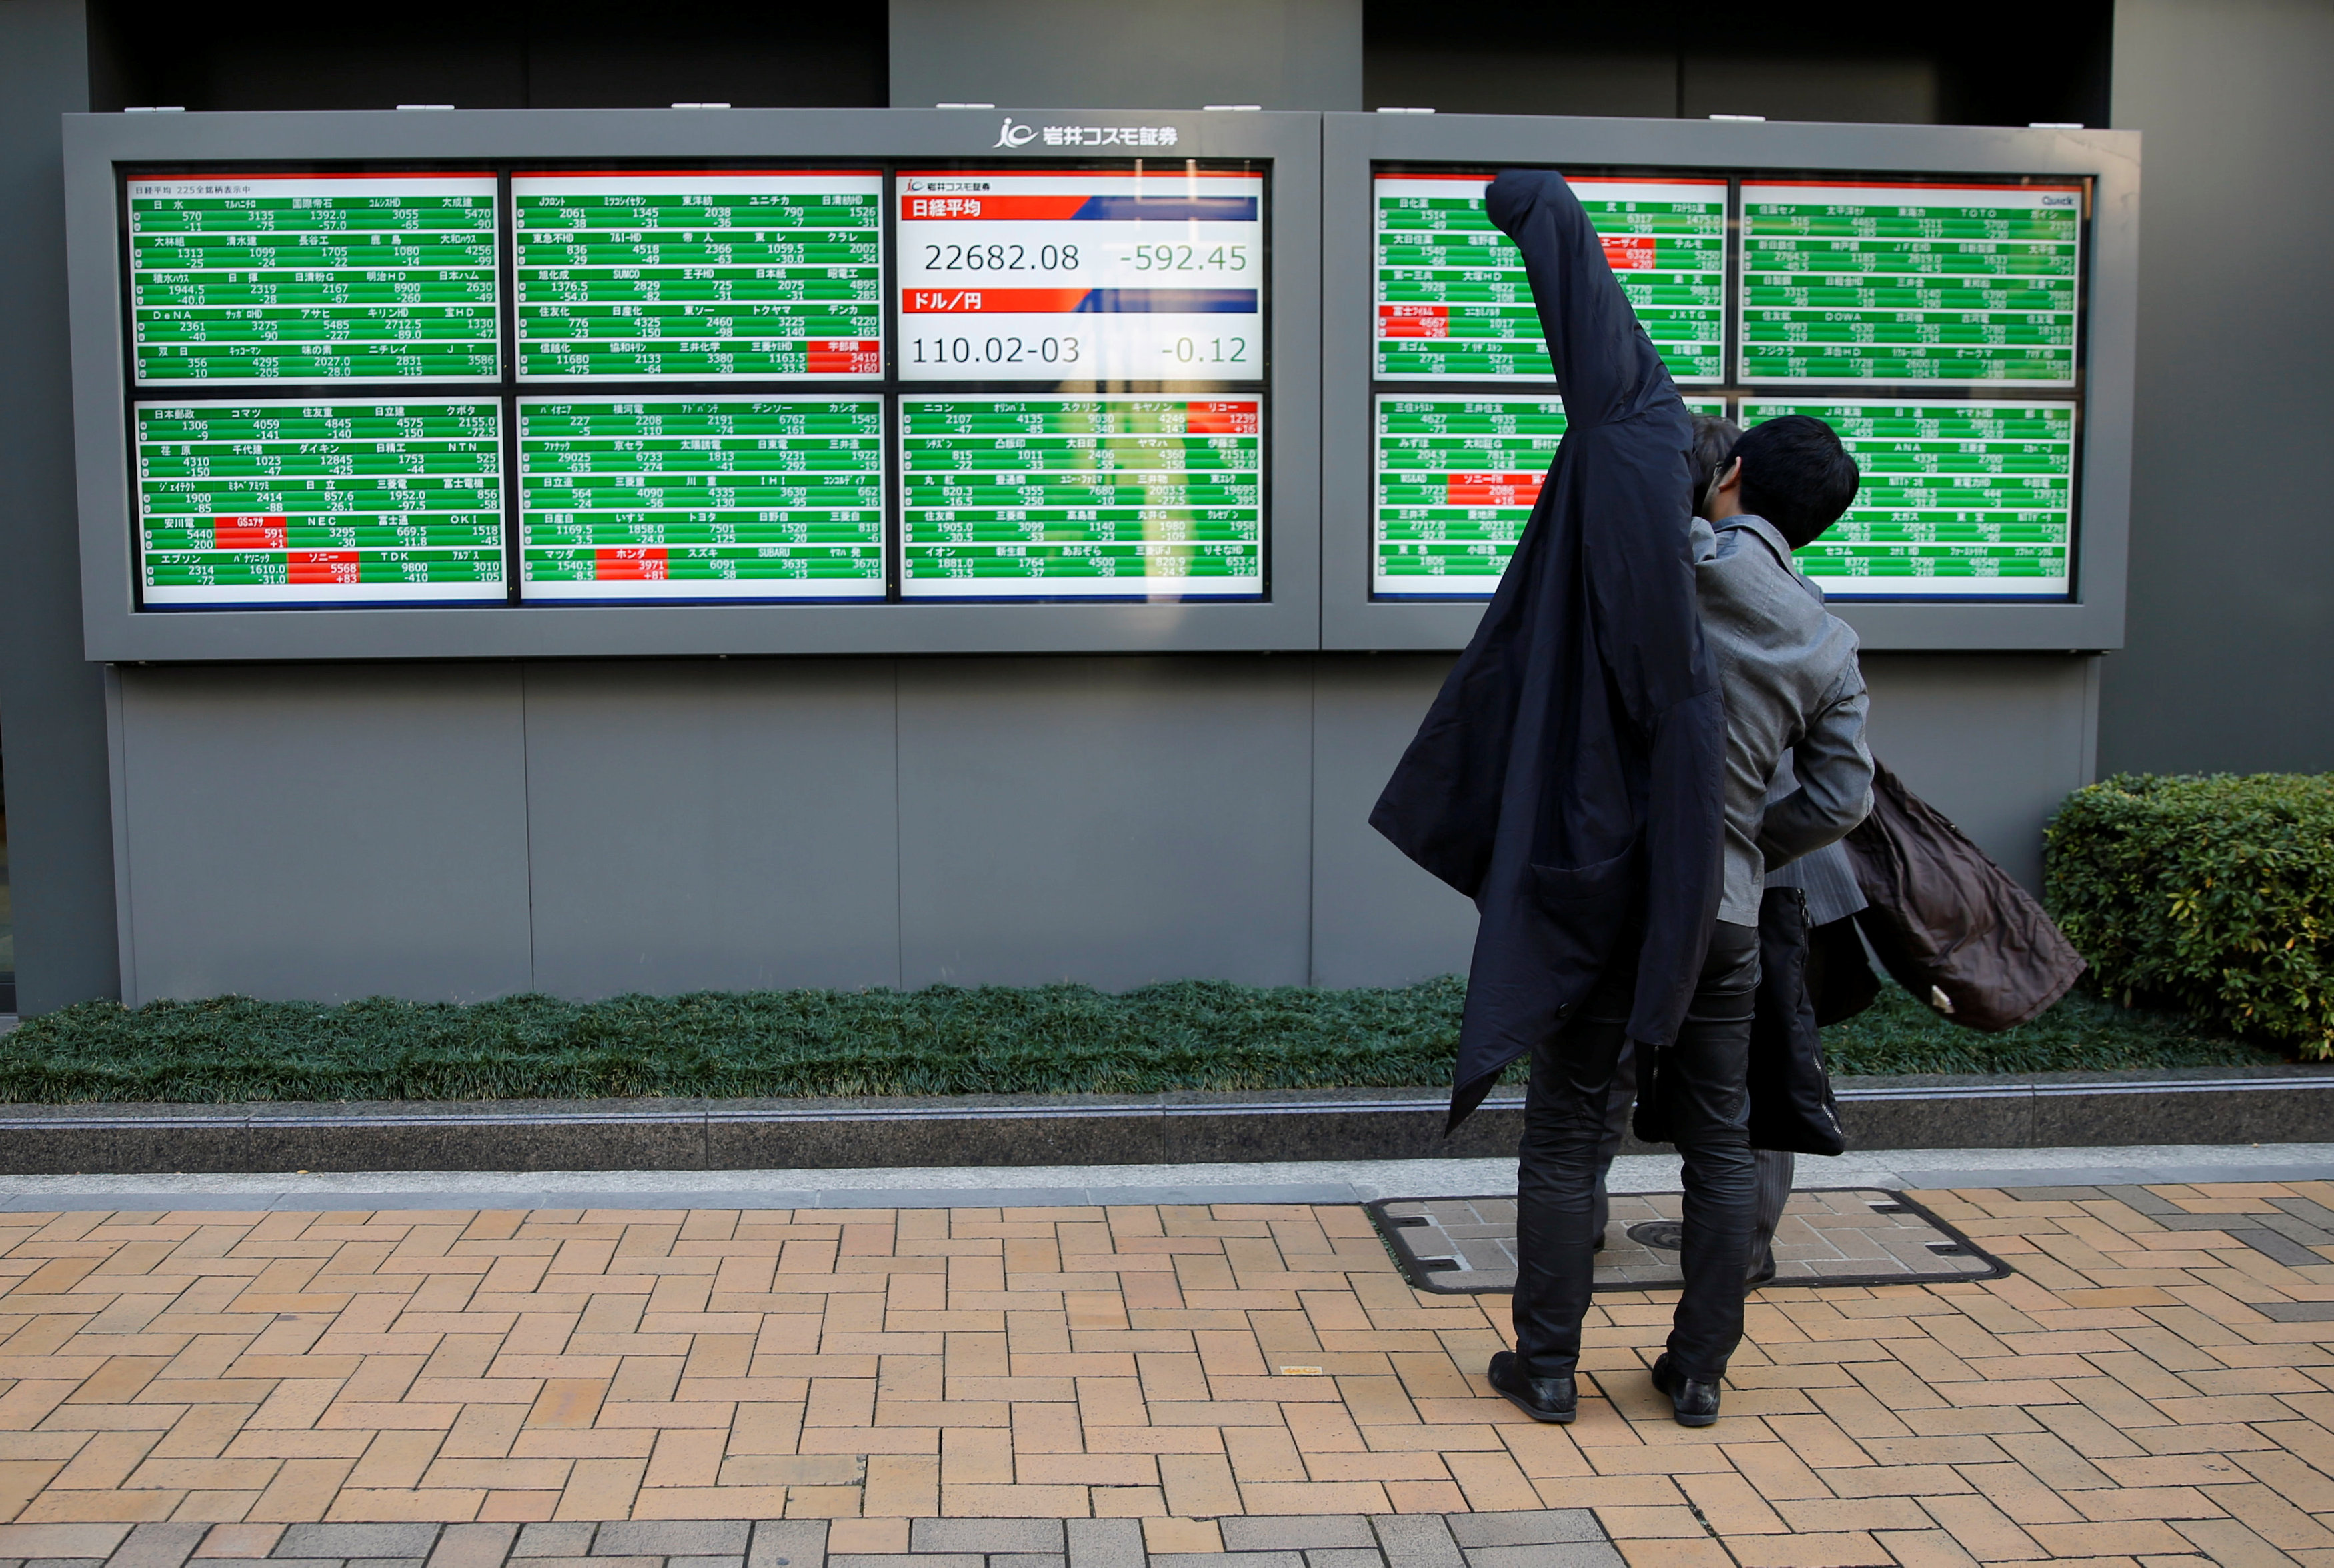 Asian shares rattled by rising US yields, cost worries